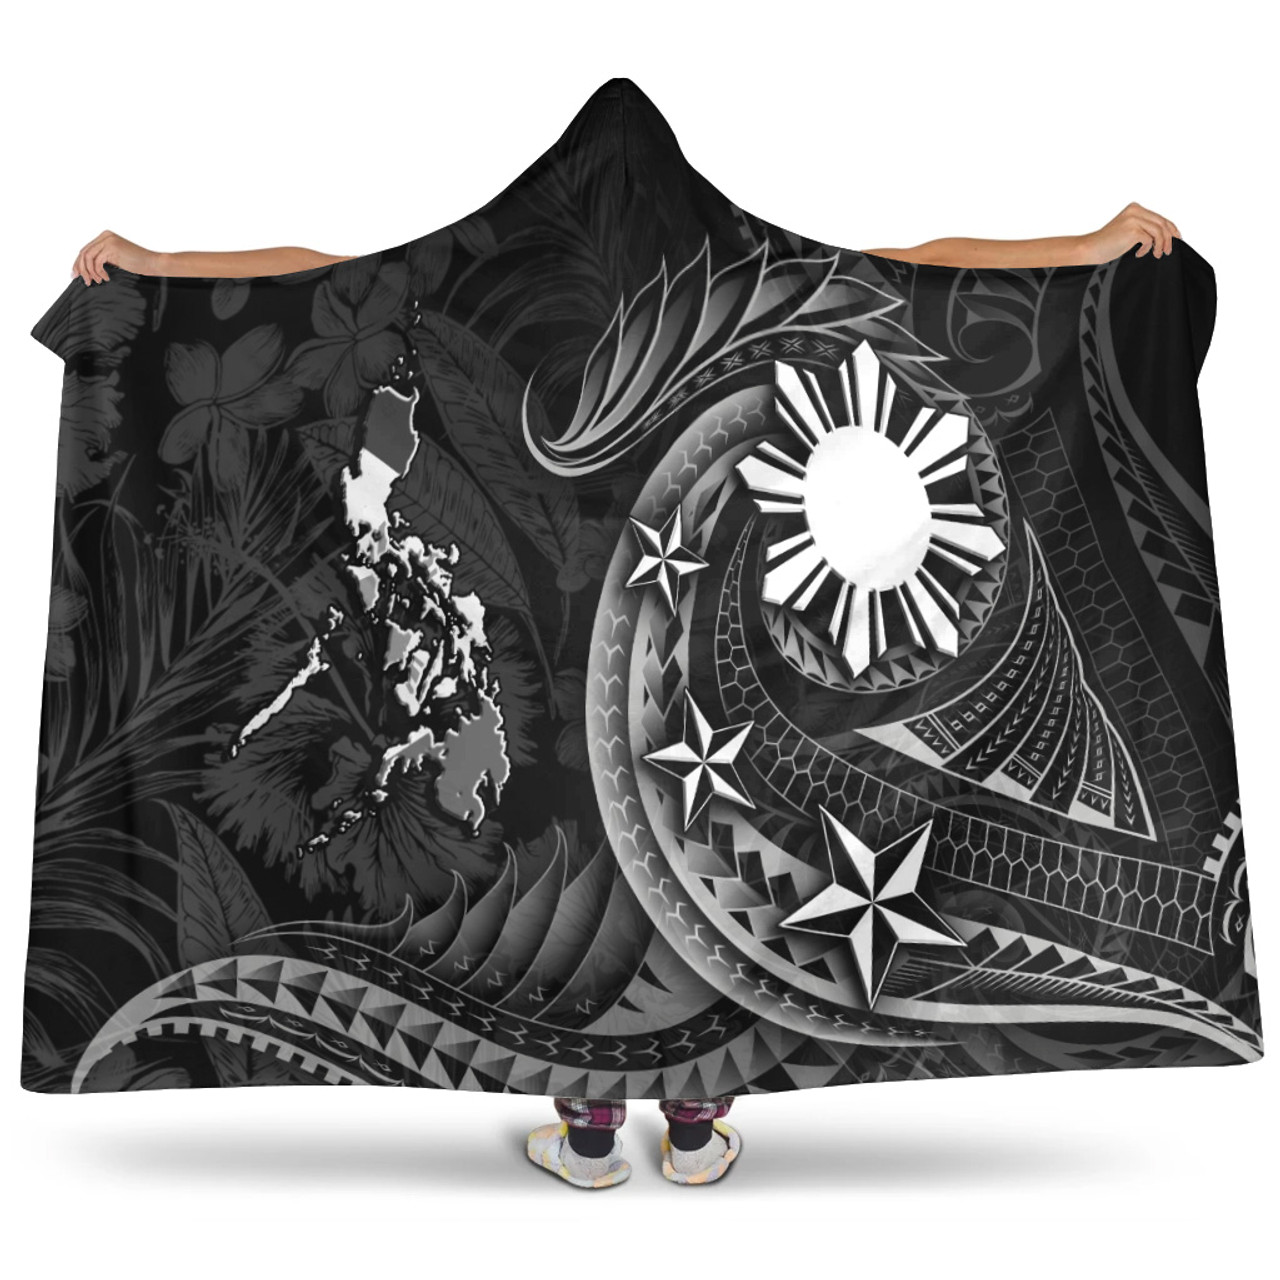 Philippines Filipinos Hooded Blanket Philippines Sun Tribal Patterns Tropical Flowers Curve Style